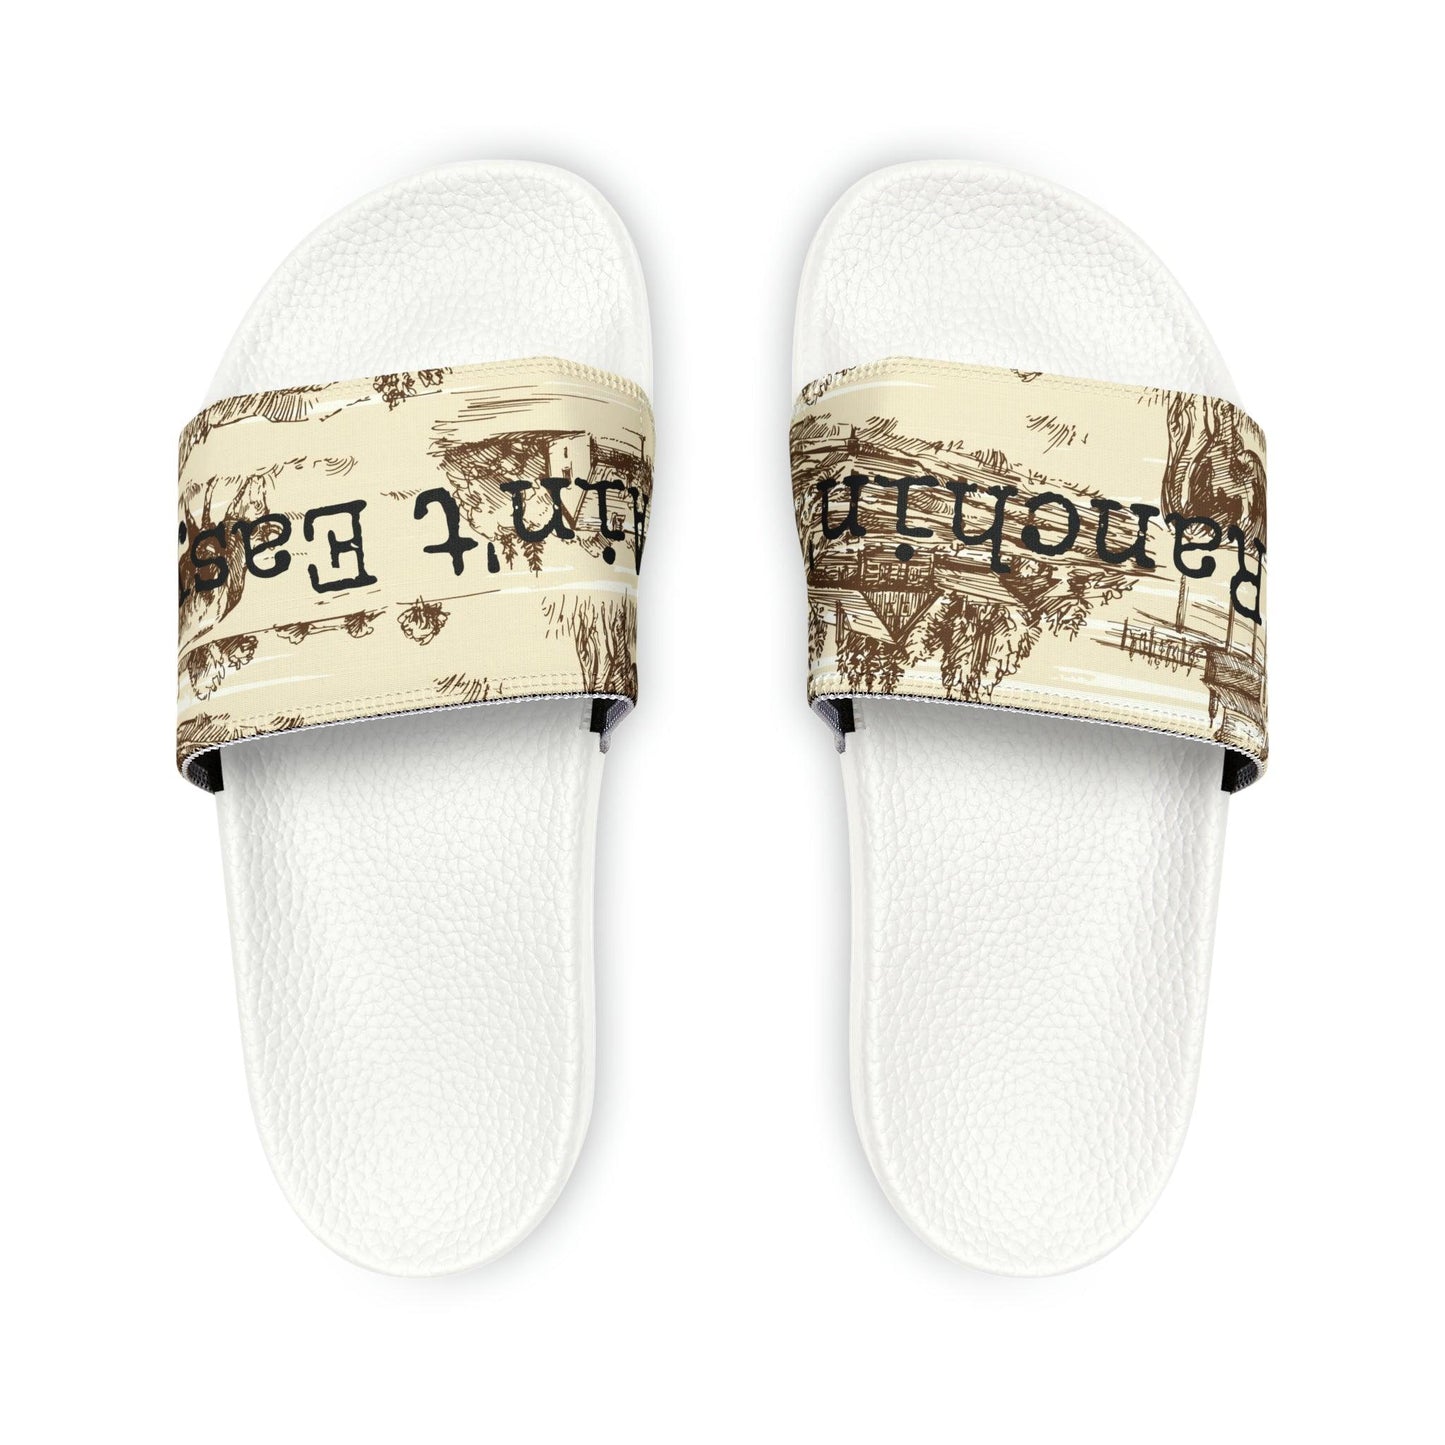 Ranchin’ Ain’t Easy Women's PU Slide SandalsTake on the summer heat with style thanks to these personalized slide sandals for women. Made with PU outsoles and an edge-to-edge strap customization that will nevePU Slide SandalsThe Hufeisen-Ranch (WYO Wagyu)Shoes